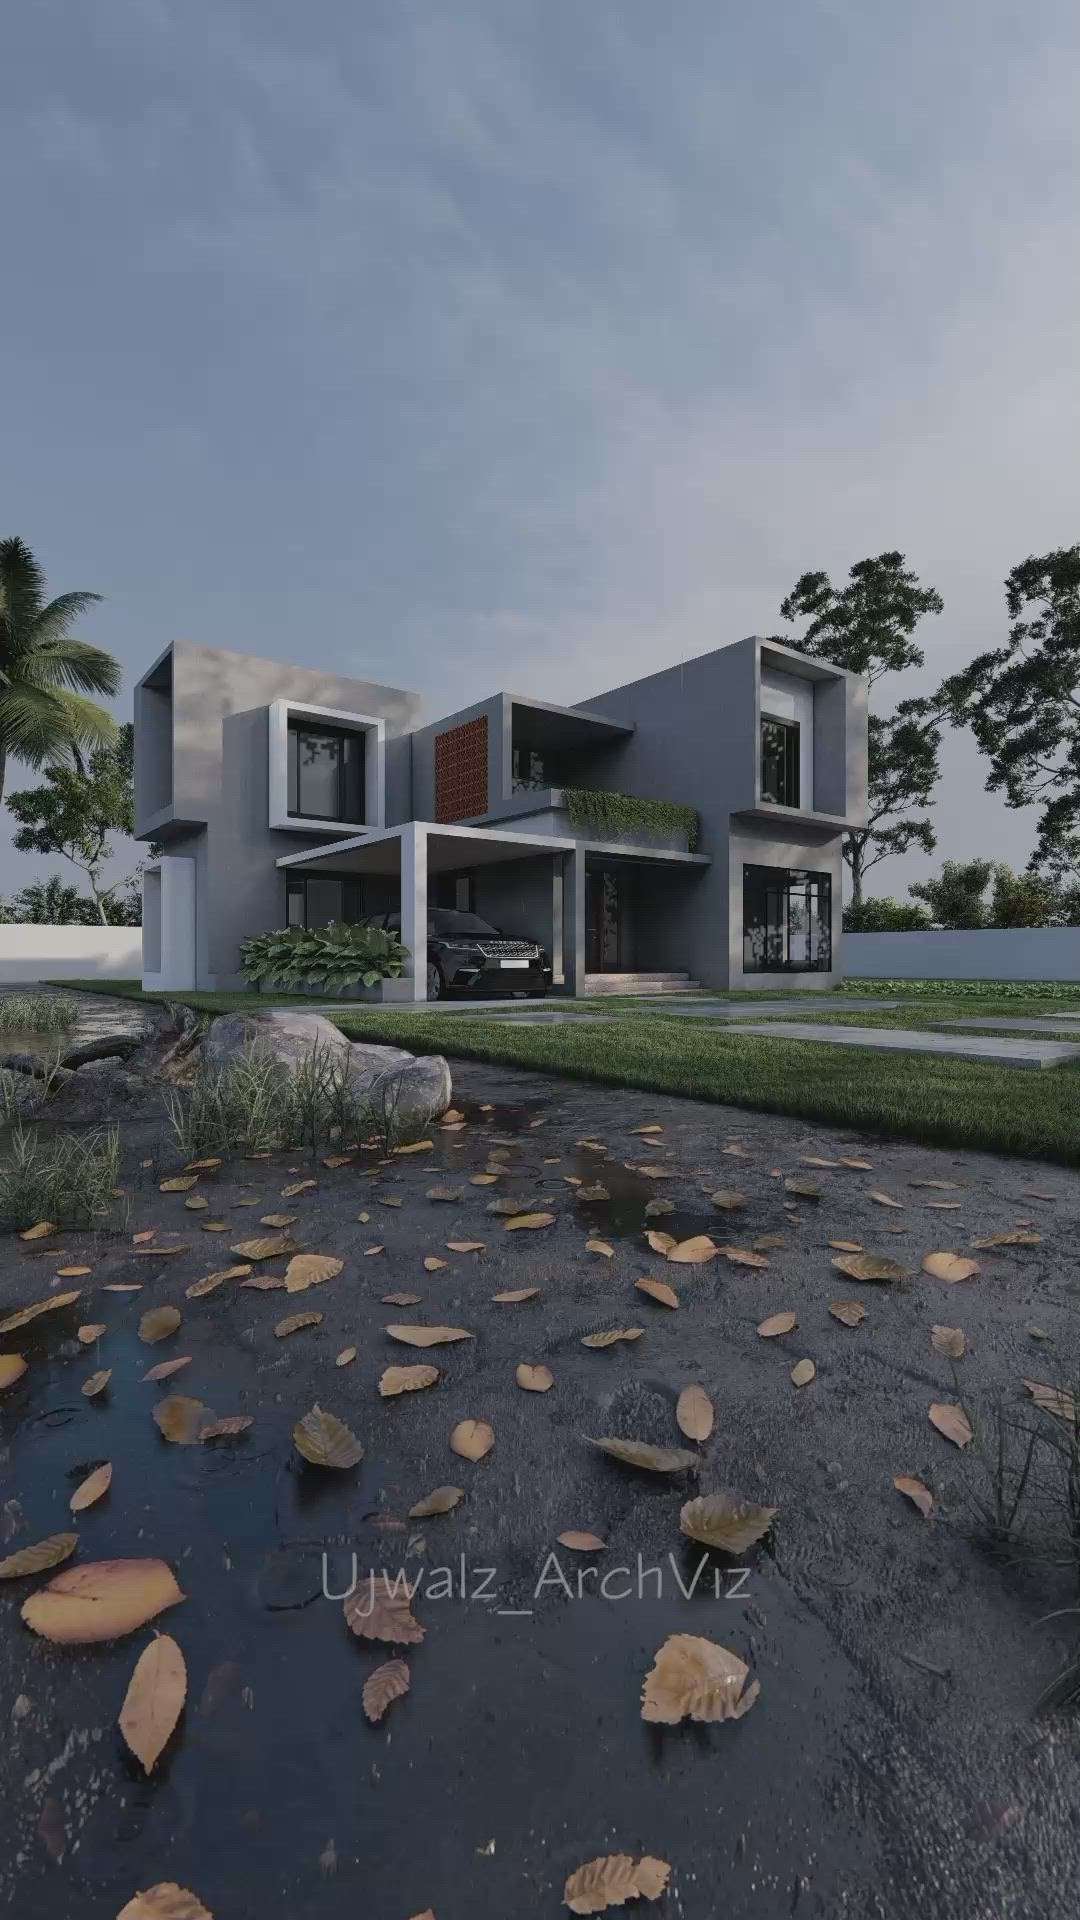 Lumion walkthrough try

Sketch up + lumion 11

#beautifulhomes #architecture #plants #home #trendingdesign  #keralahomes #videooftheday #homes #homestyling #KeralaStyleHouse  #homesweethome  #keralaarchitecturehomes  #koloviral  #koloapp  #reelsvideo #reels #reelsindia #koloindia  #reelsinsta #keralareels #reelsviral #reel #reelitfeelit #keralareels #reelsviral #reel #exteriordesigns  #traditional #keralastyle  #ElevationHome  #architecturedesigns  #keralaarchitecture #architecture